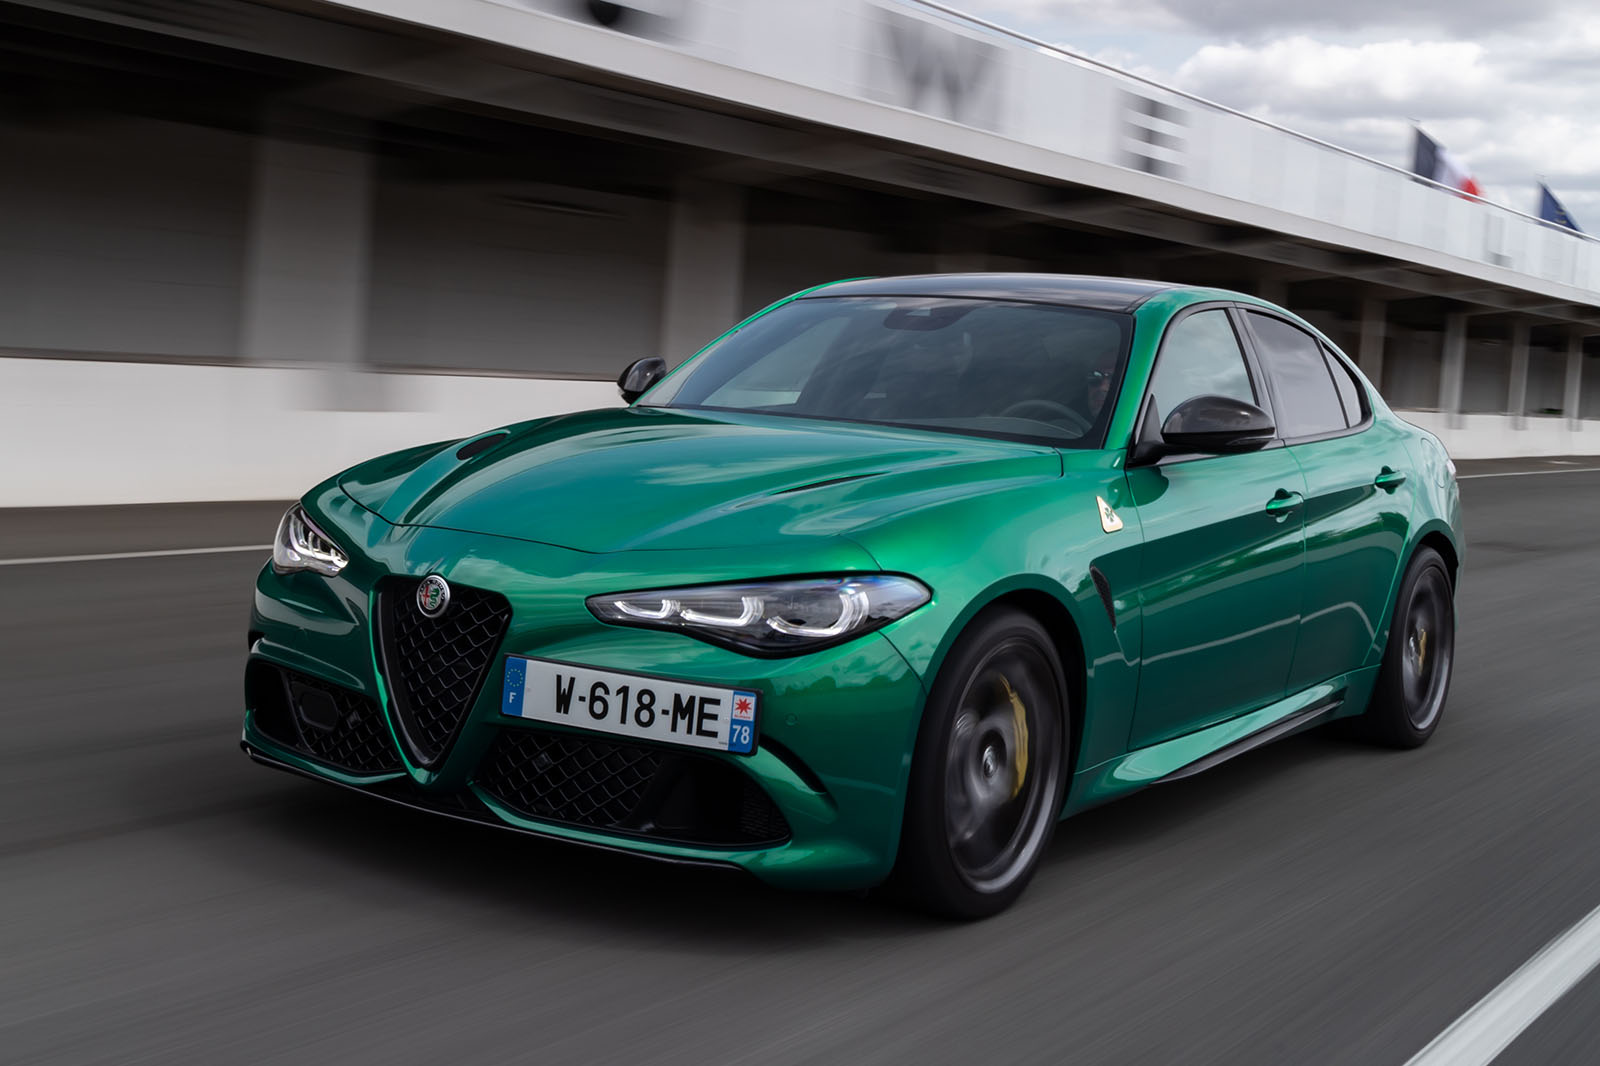 https://www.autocar.co.uk/sites/autocar.co.uk/files/images/car-reviews/first-drives/legacy/alfa-romeo-giulia-quadrifoglio-100years-review-01-tracking-front.jpg